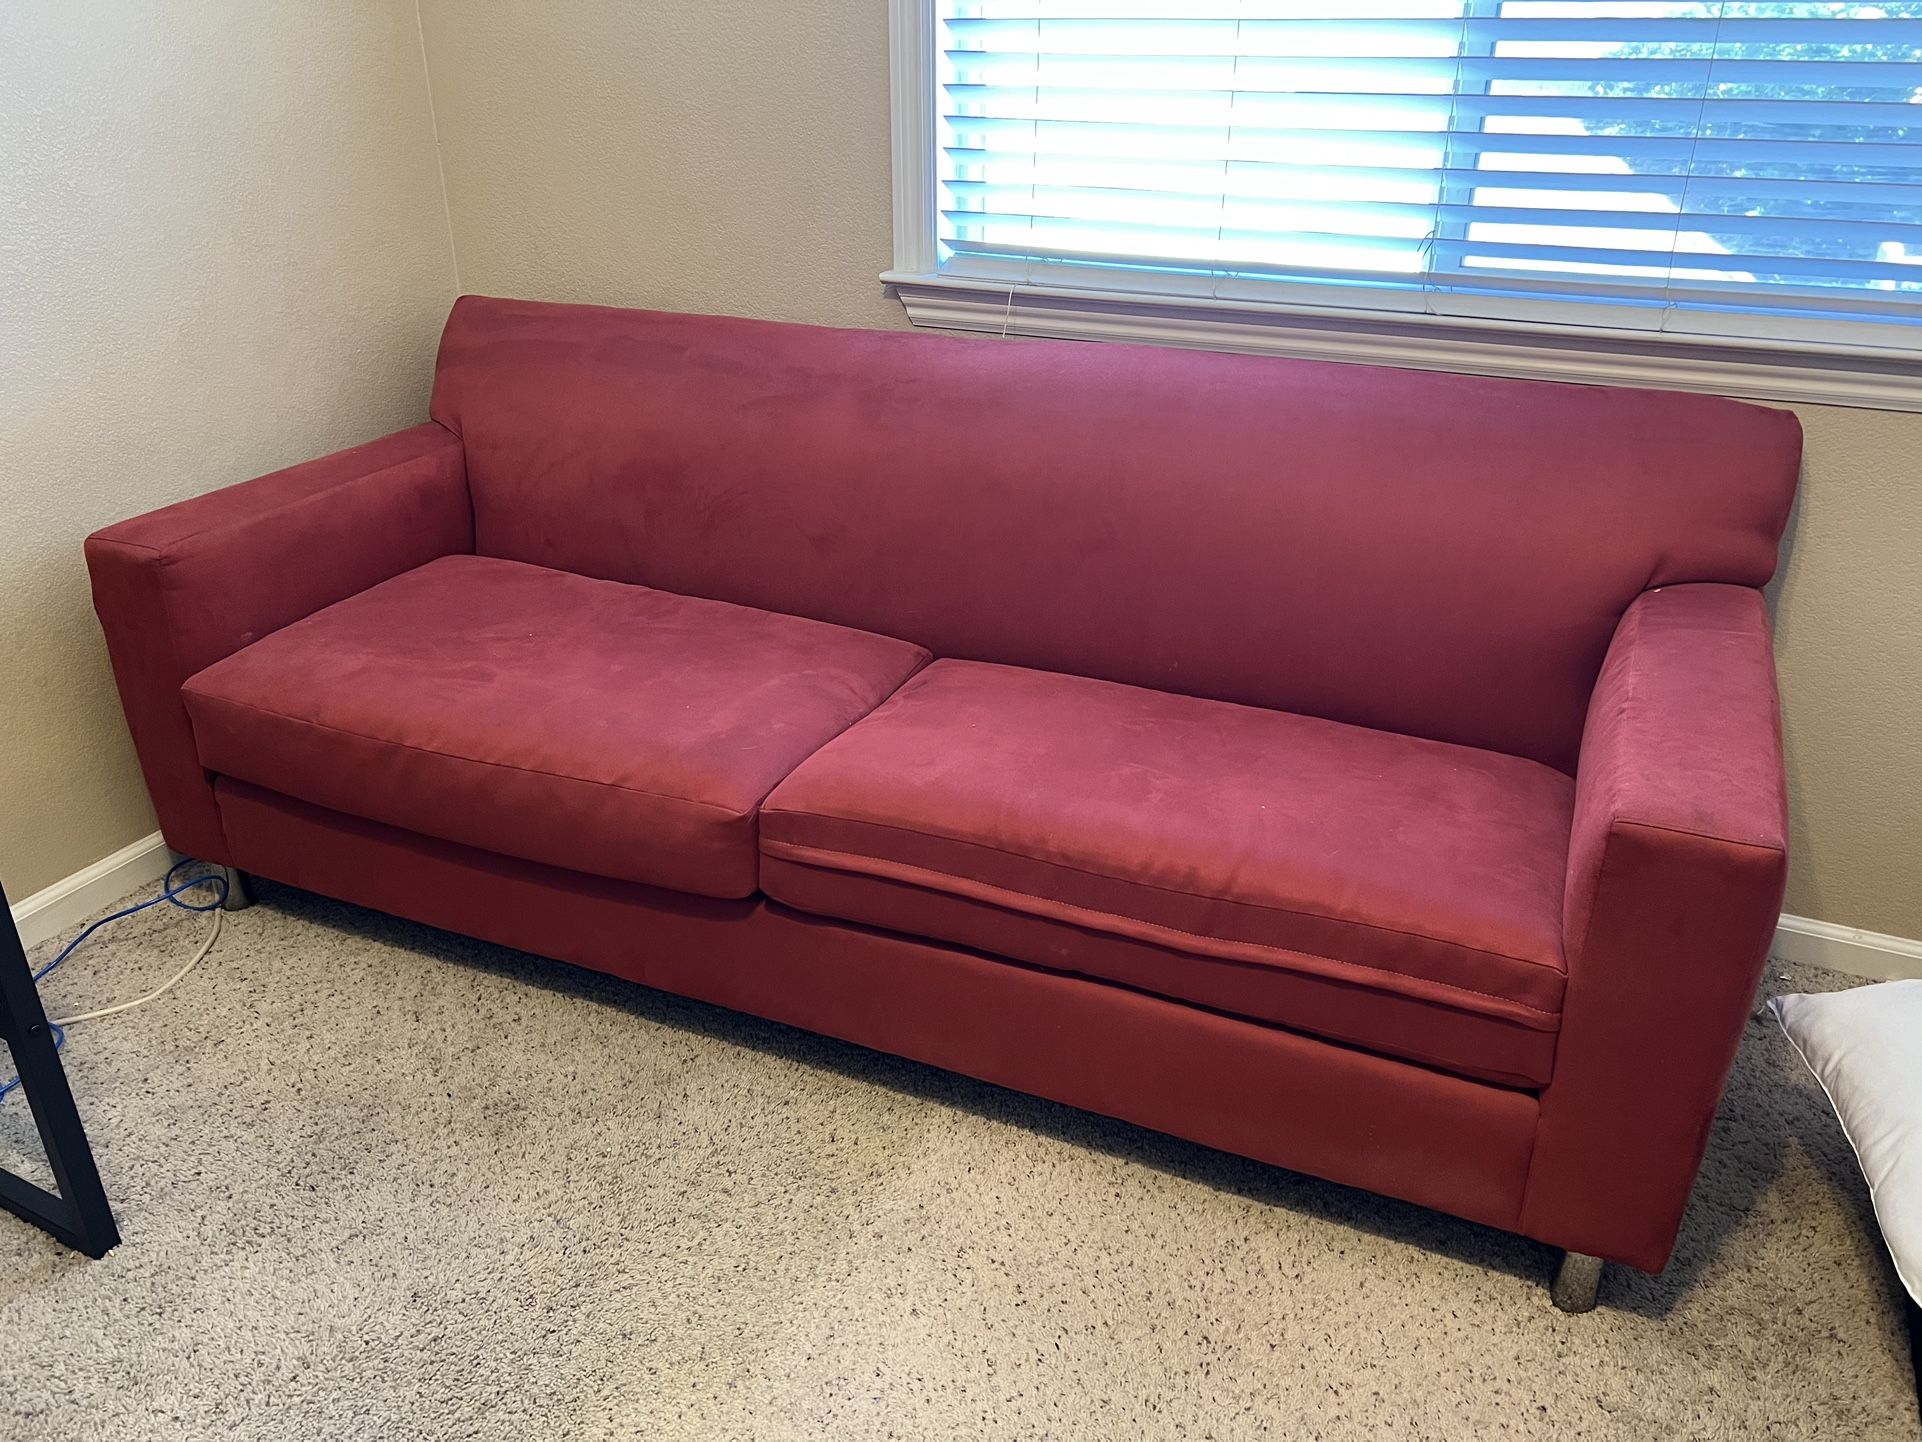  Red couches 